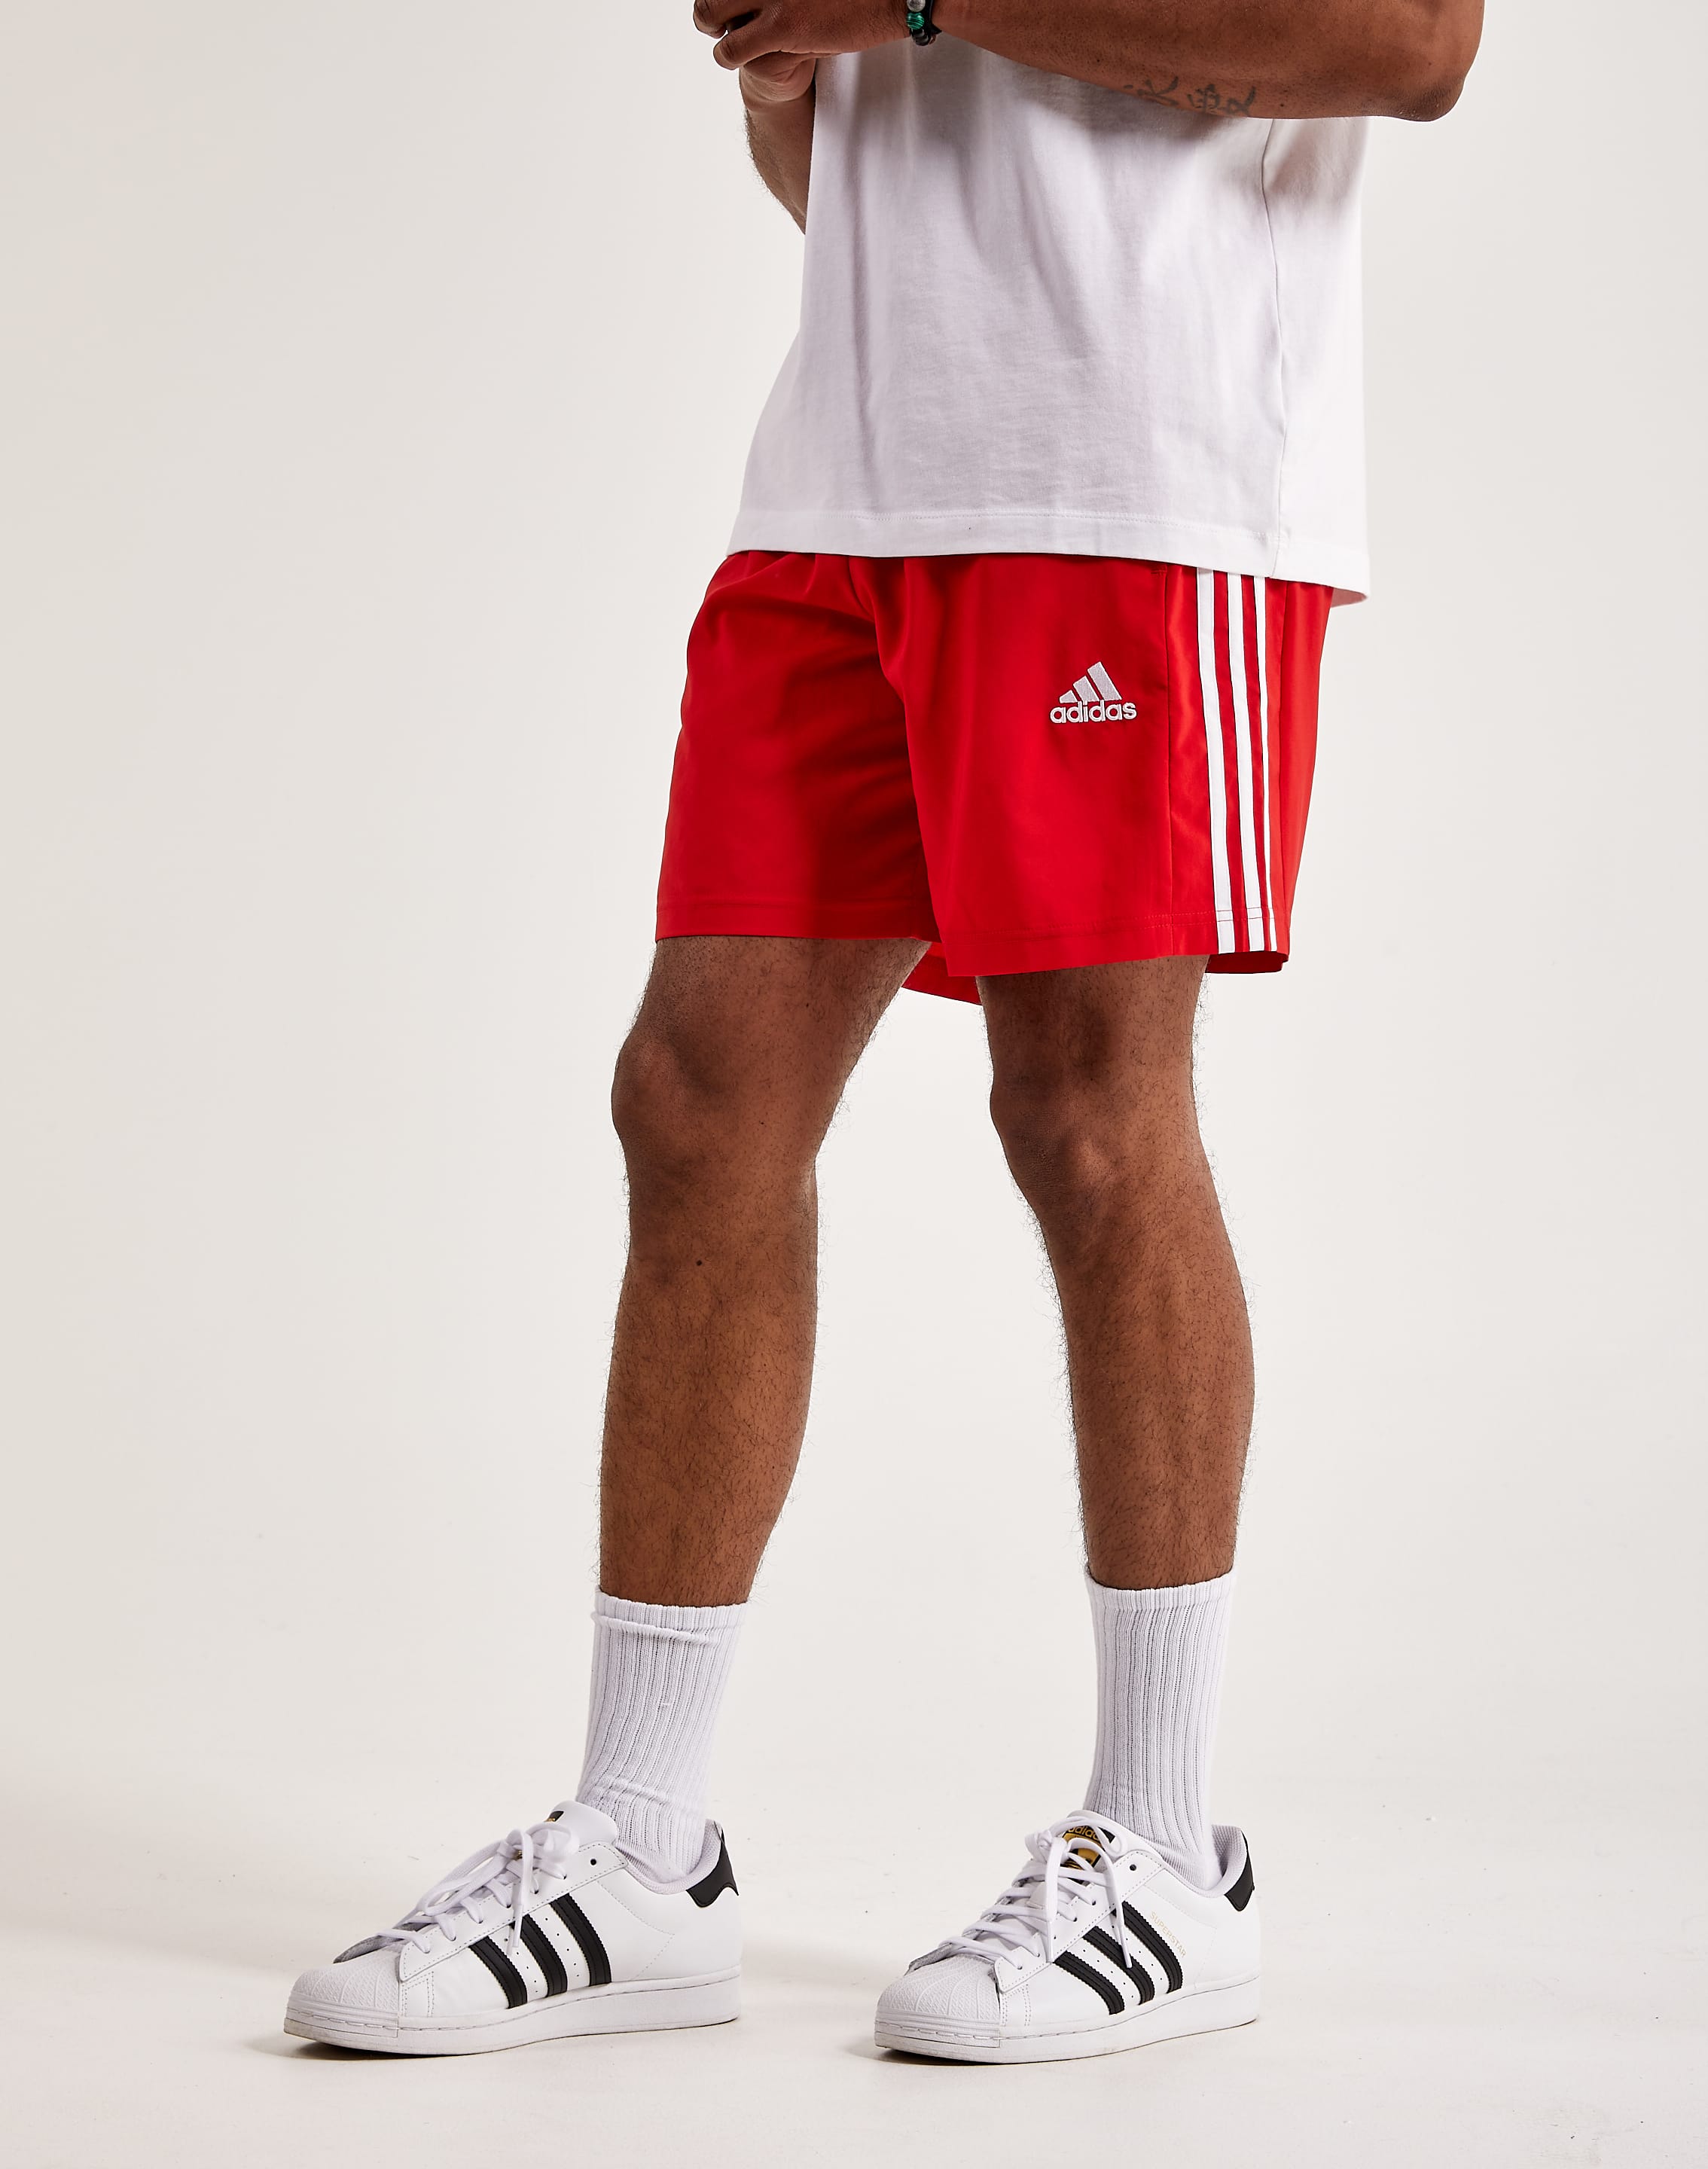 Shorts DTLR Chelsea Adidas – 3-Stripes